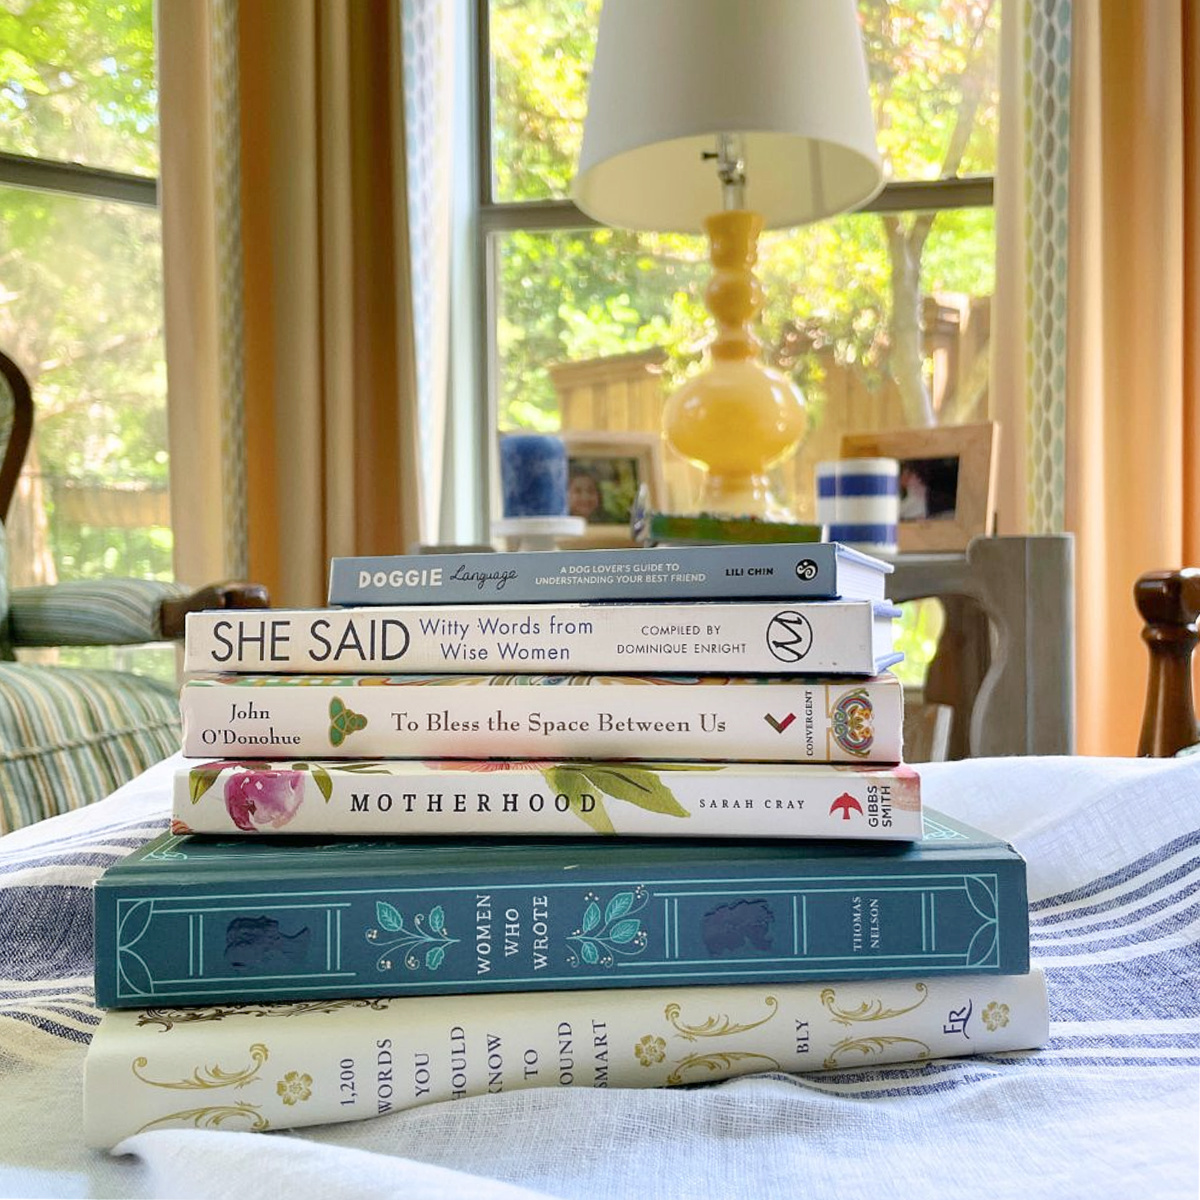 10 Great Books for Mother's Day Gifts - Bluesky at Home